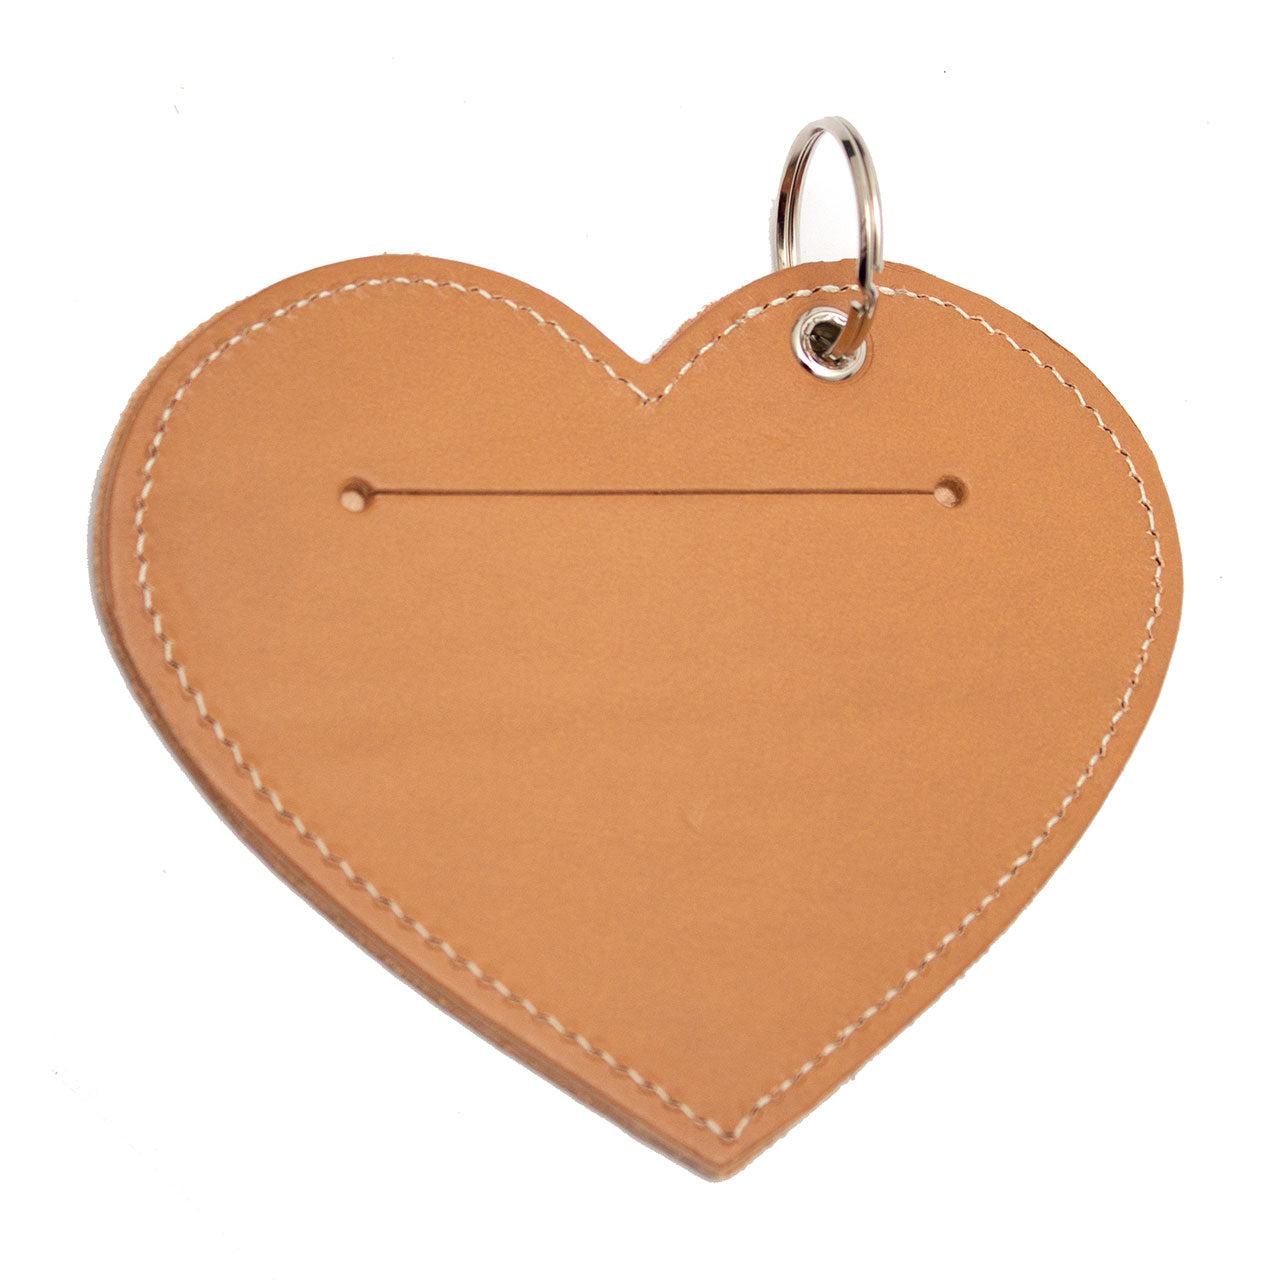 Poo Pouch Heart 'Tan Leather'-Poo Pouch-Hiro + Wolf